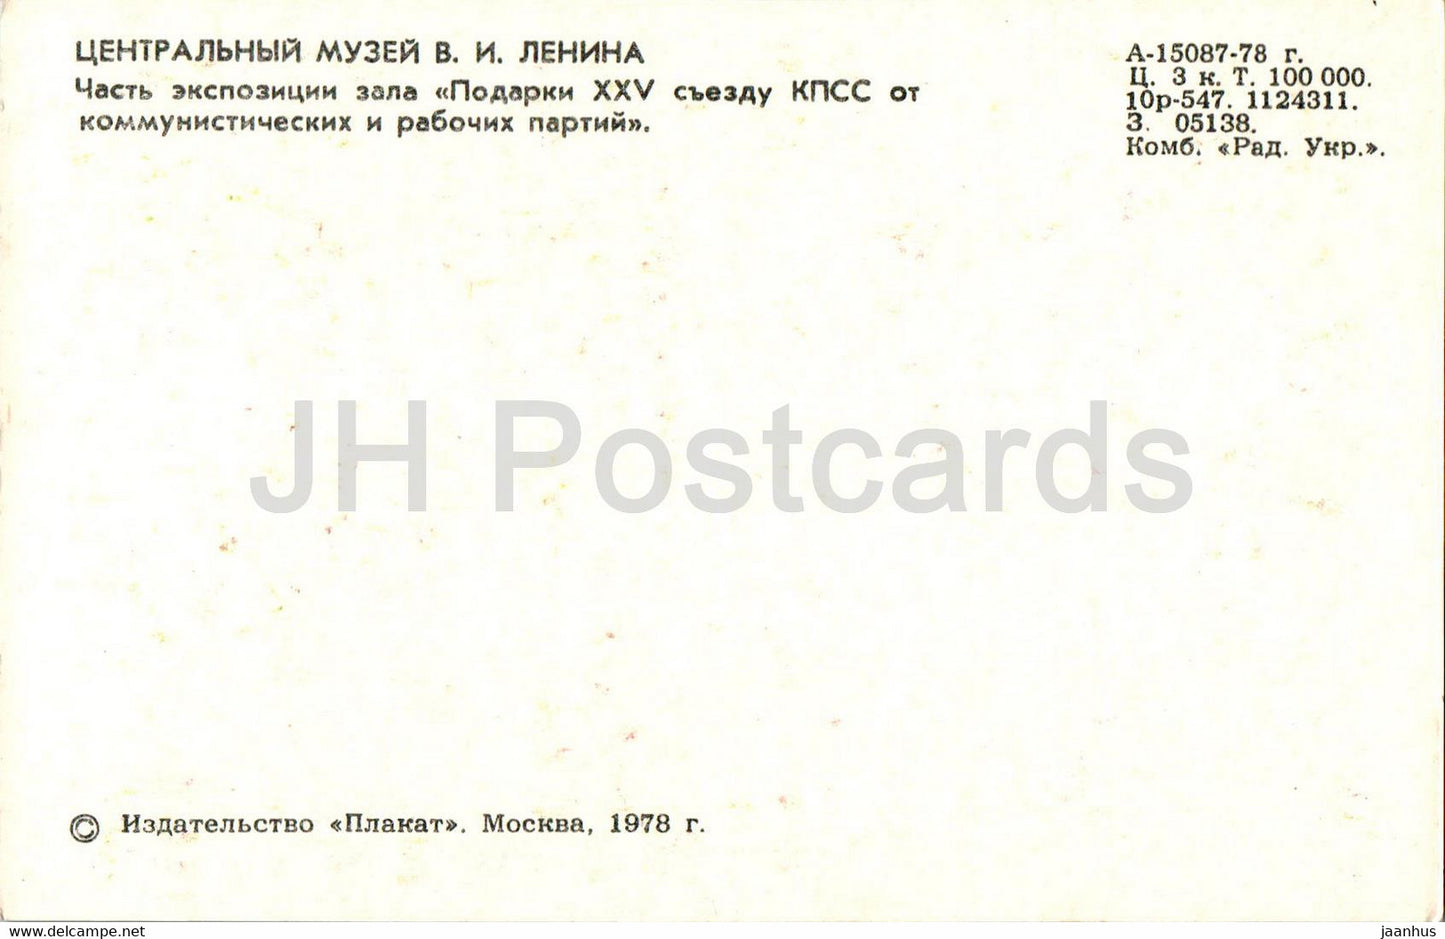 Moscow - Lenin Central Museum - Gifts to XXV Congress CPSU - 1978 - Russia USSR - unused